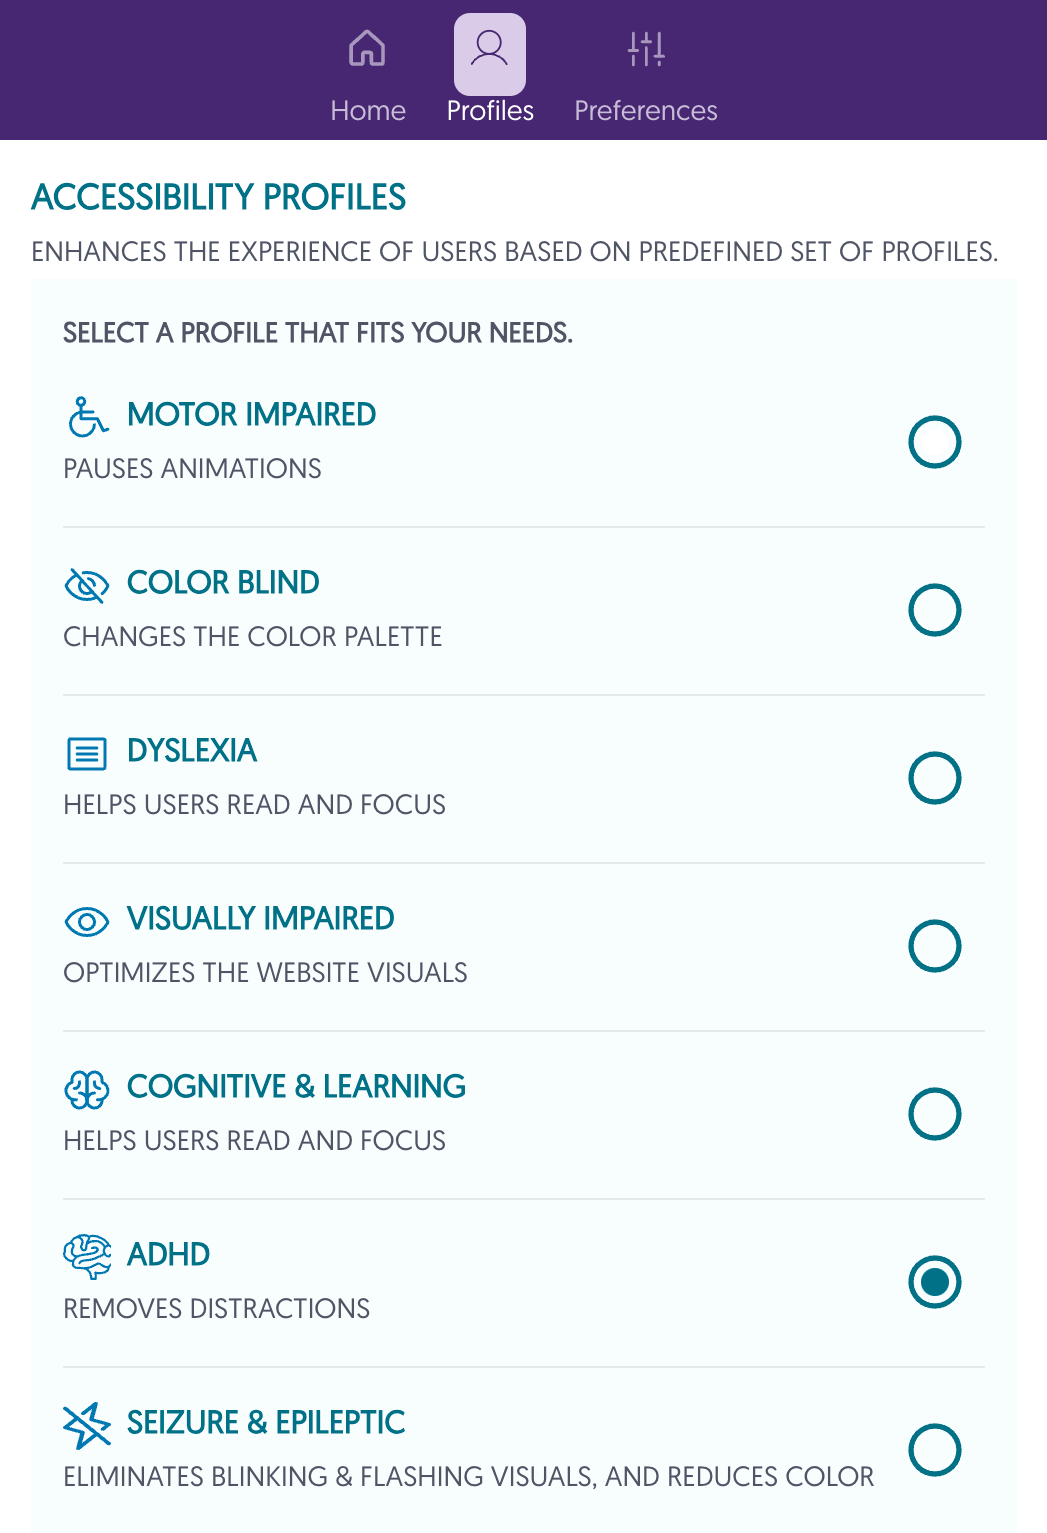 Pop-up of adhd profile options.